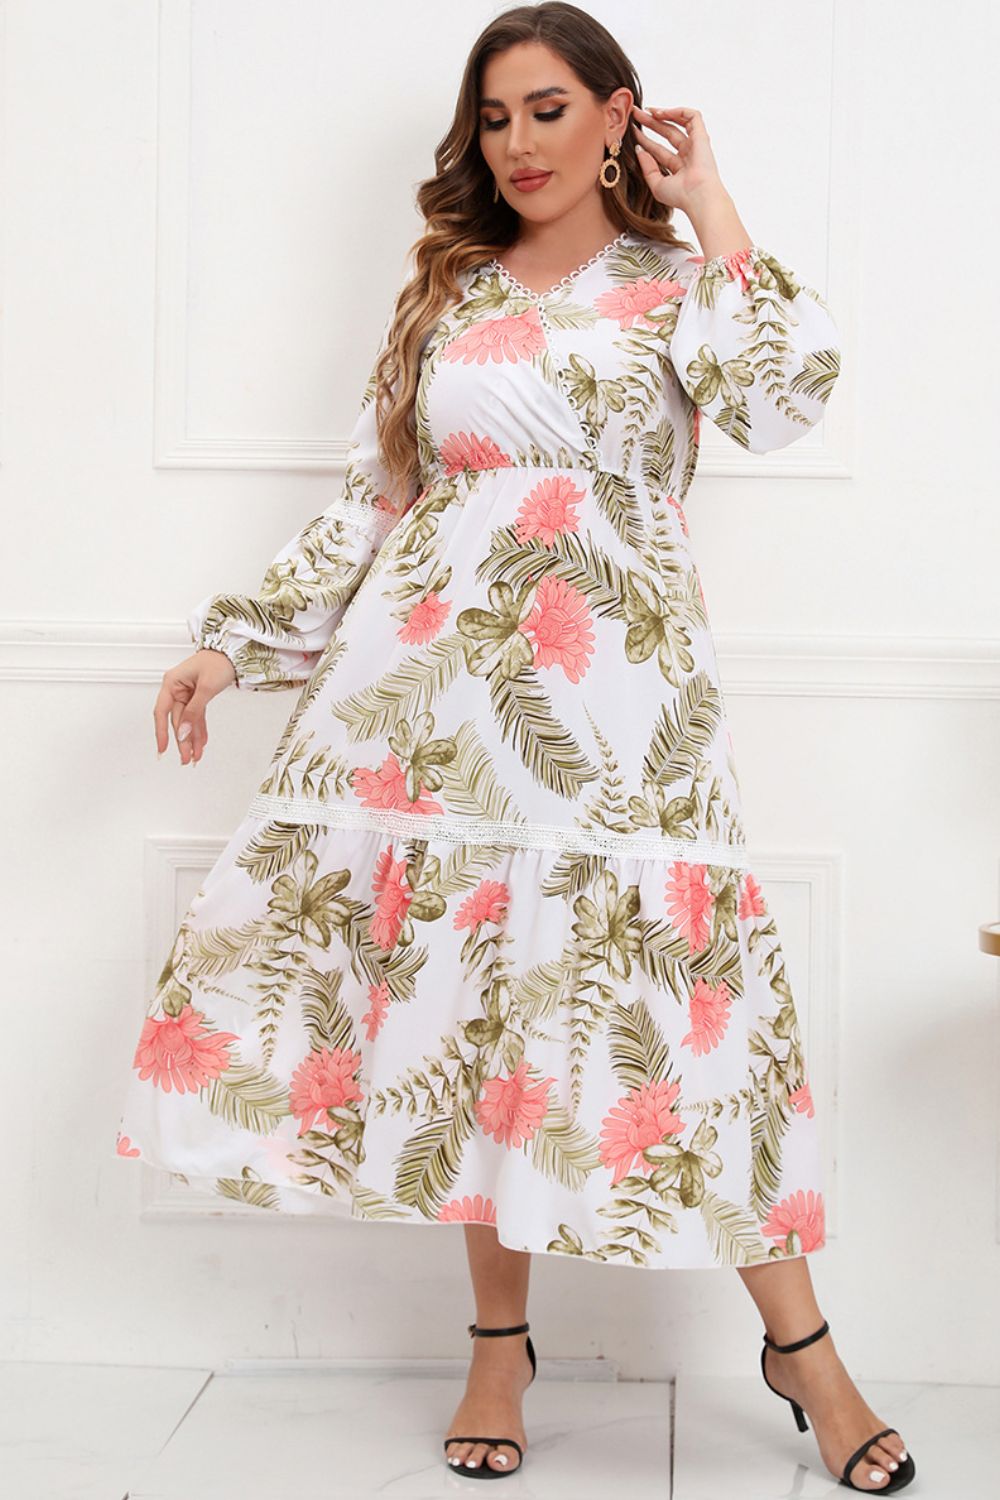 Elegant Plus Size Beach Wedding Guest Dress: Spliced Lace Surplice Balloon Sleeve Maxi Dress - Perfect for a Stunning and Comfortable Summer Celebration